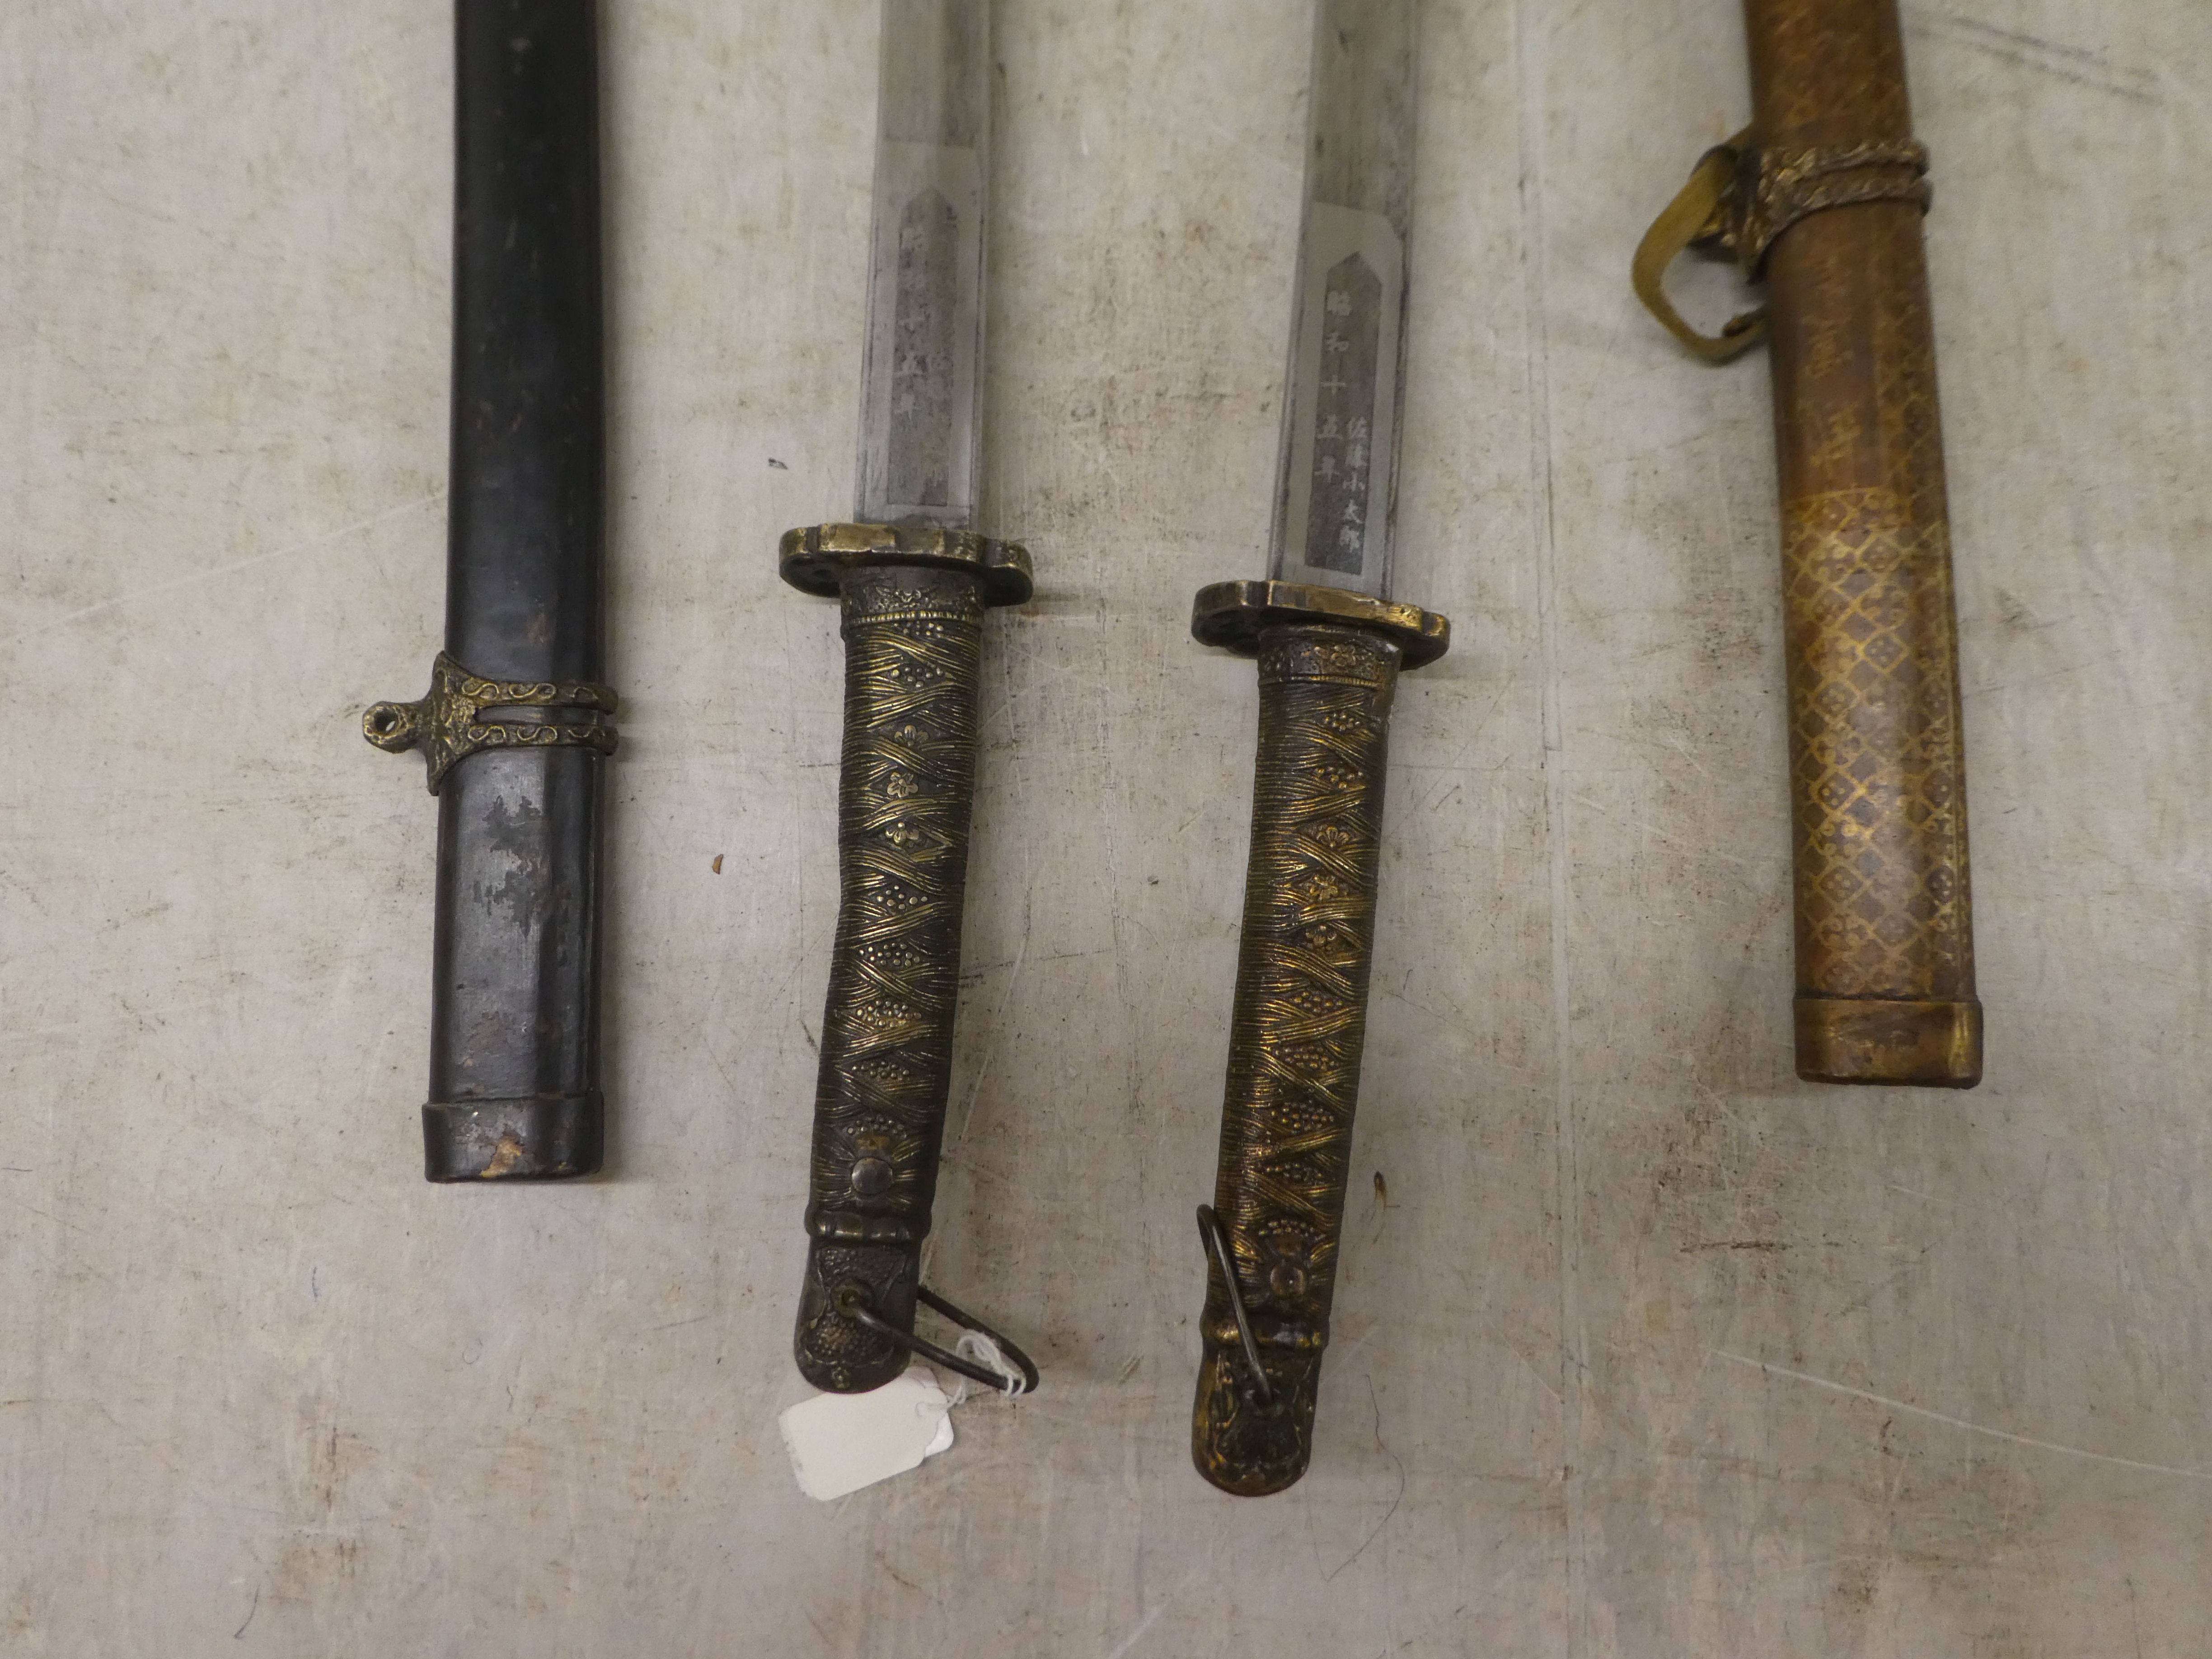 Two similar reproductions of World War II Japanese kutanas, the blades 25"L in lacquered scabbards - Image 6 of 8